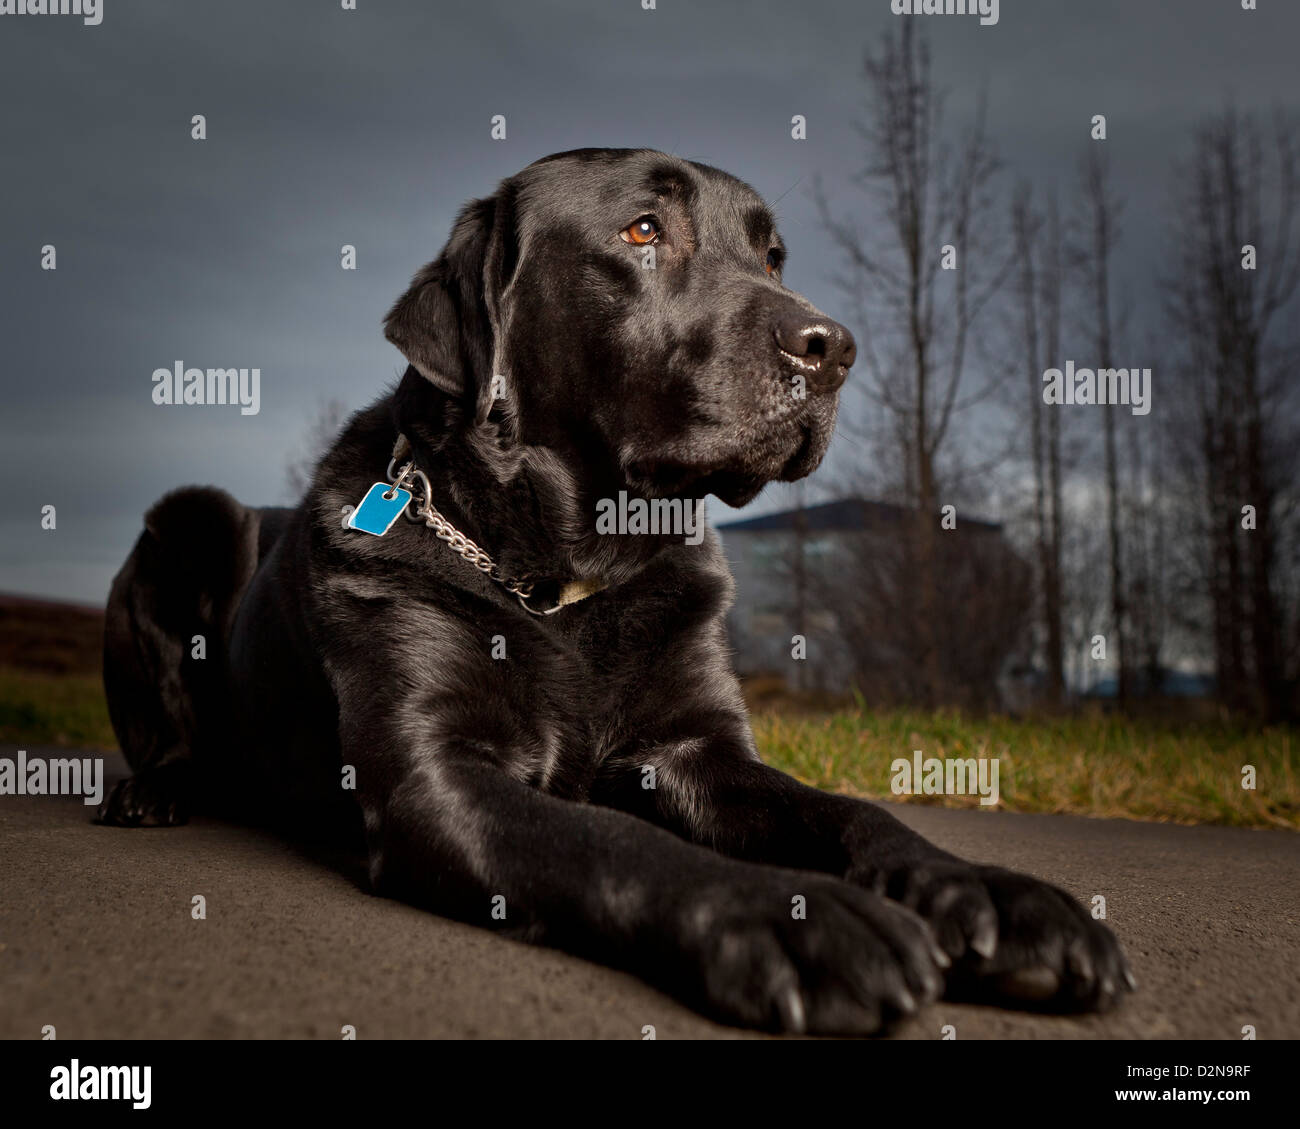 Black Labrador Retriever lying down. Young male guide dog for the blind. Stock Photo